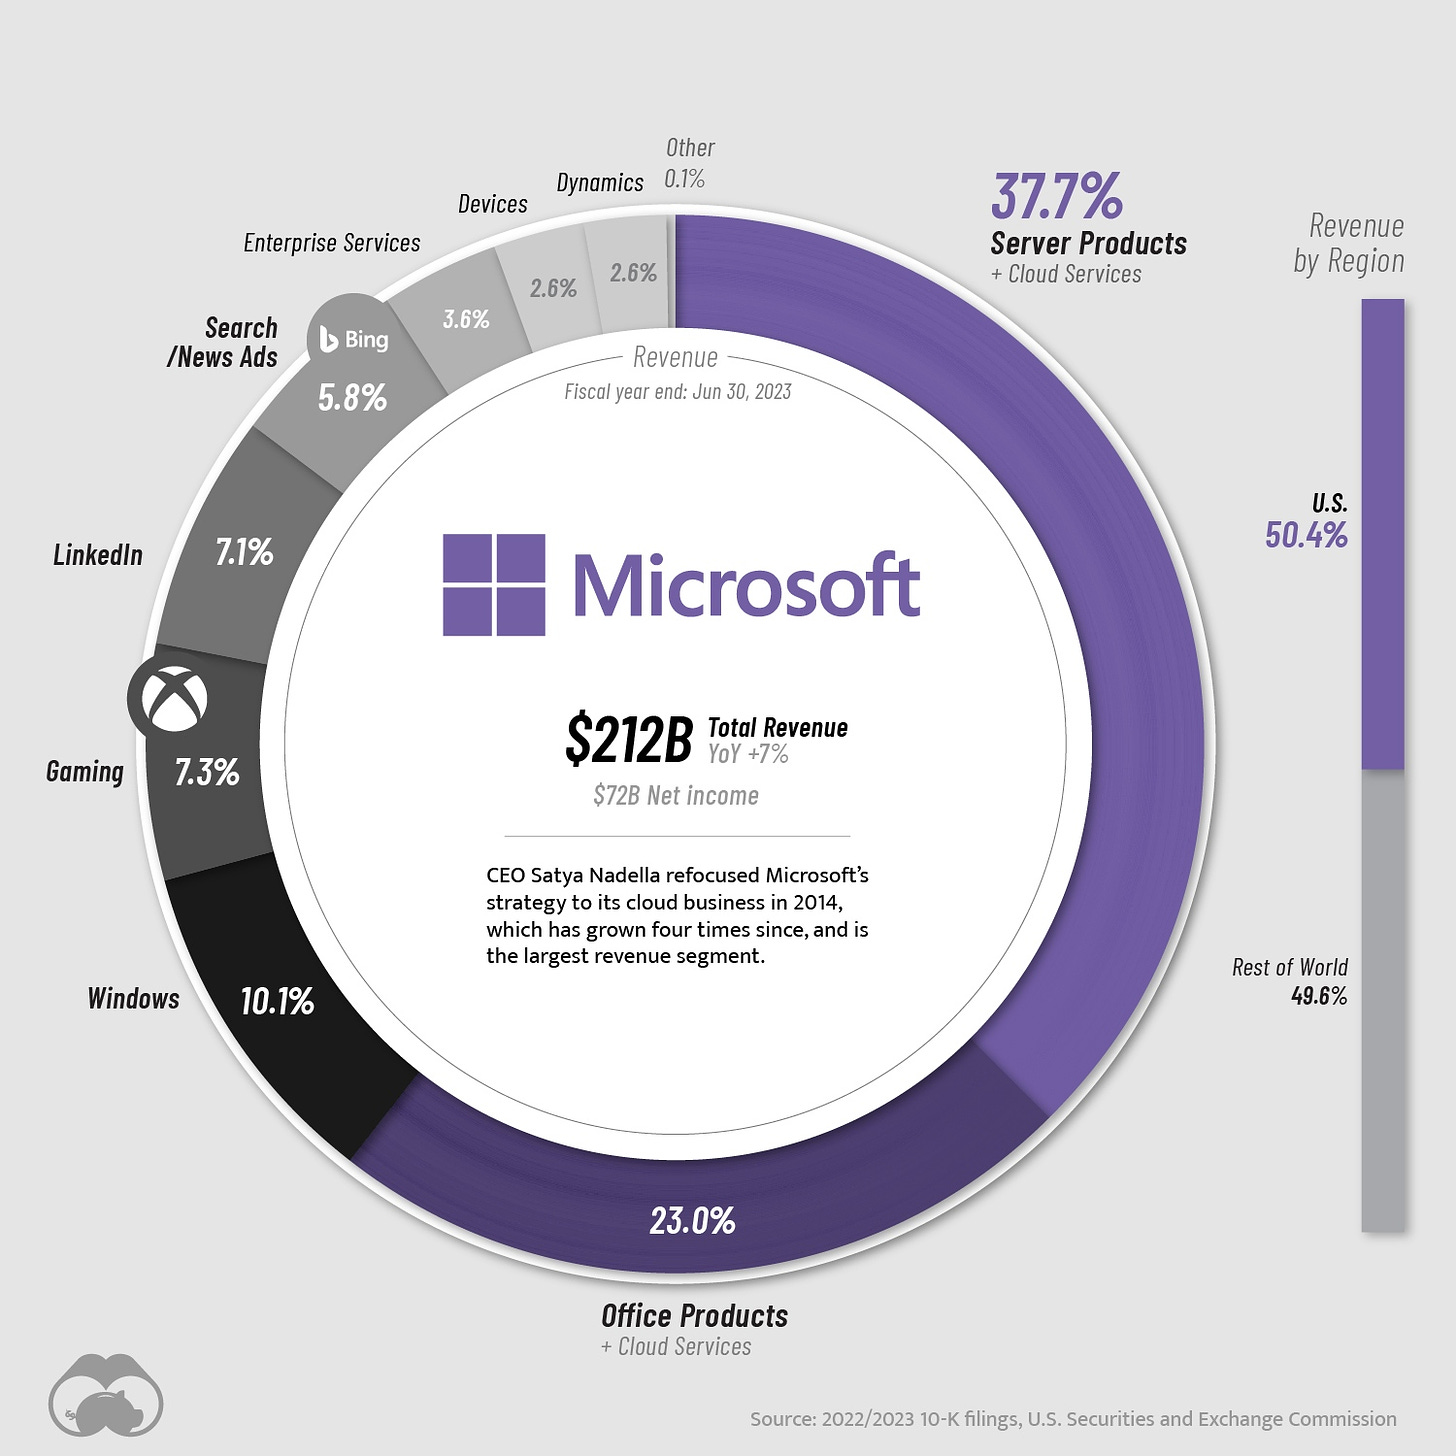 May be a graphic of text that says 'Other Dynamics 0.1% Devices Enterprise Services Search /News Ads 2.6% 2.6% 3.6% Bing 37.7% Server Products Cloud Services 5.8% Revenue Fiscal Revenue by Region 2023 Linkedln 7.1% U.S. 50.4% Gaming Microsoft 7.3% $212B Total Revenue $72B Net income Windows CEO Satya Nadella refocused Microsoft's strategy cloud business 2014, which grownfo since, the argest revenue esegment 10.1% Ûof World 49.6 49.6% 23.0% Office Products Cloud Services Û U.S. and Exchange Commission'